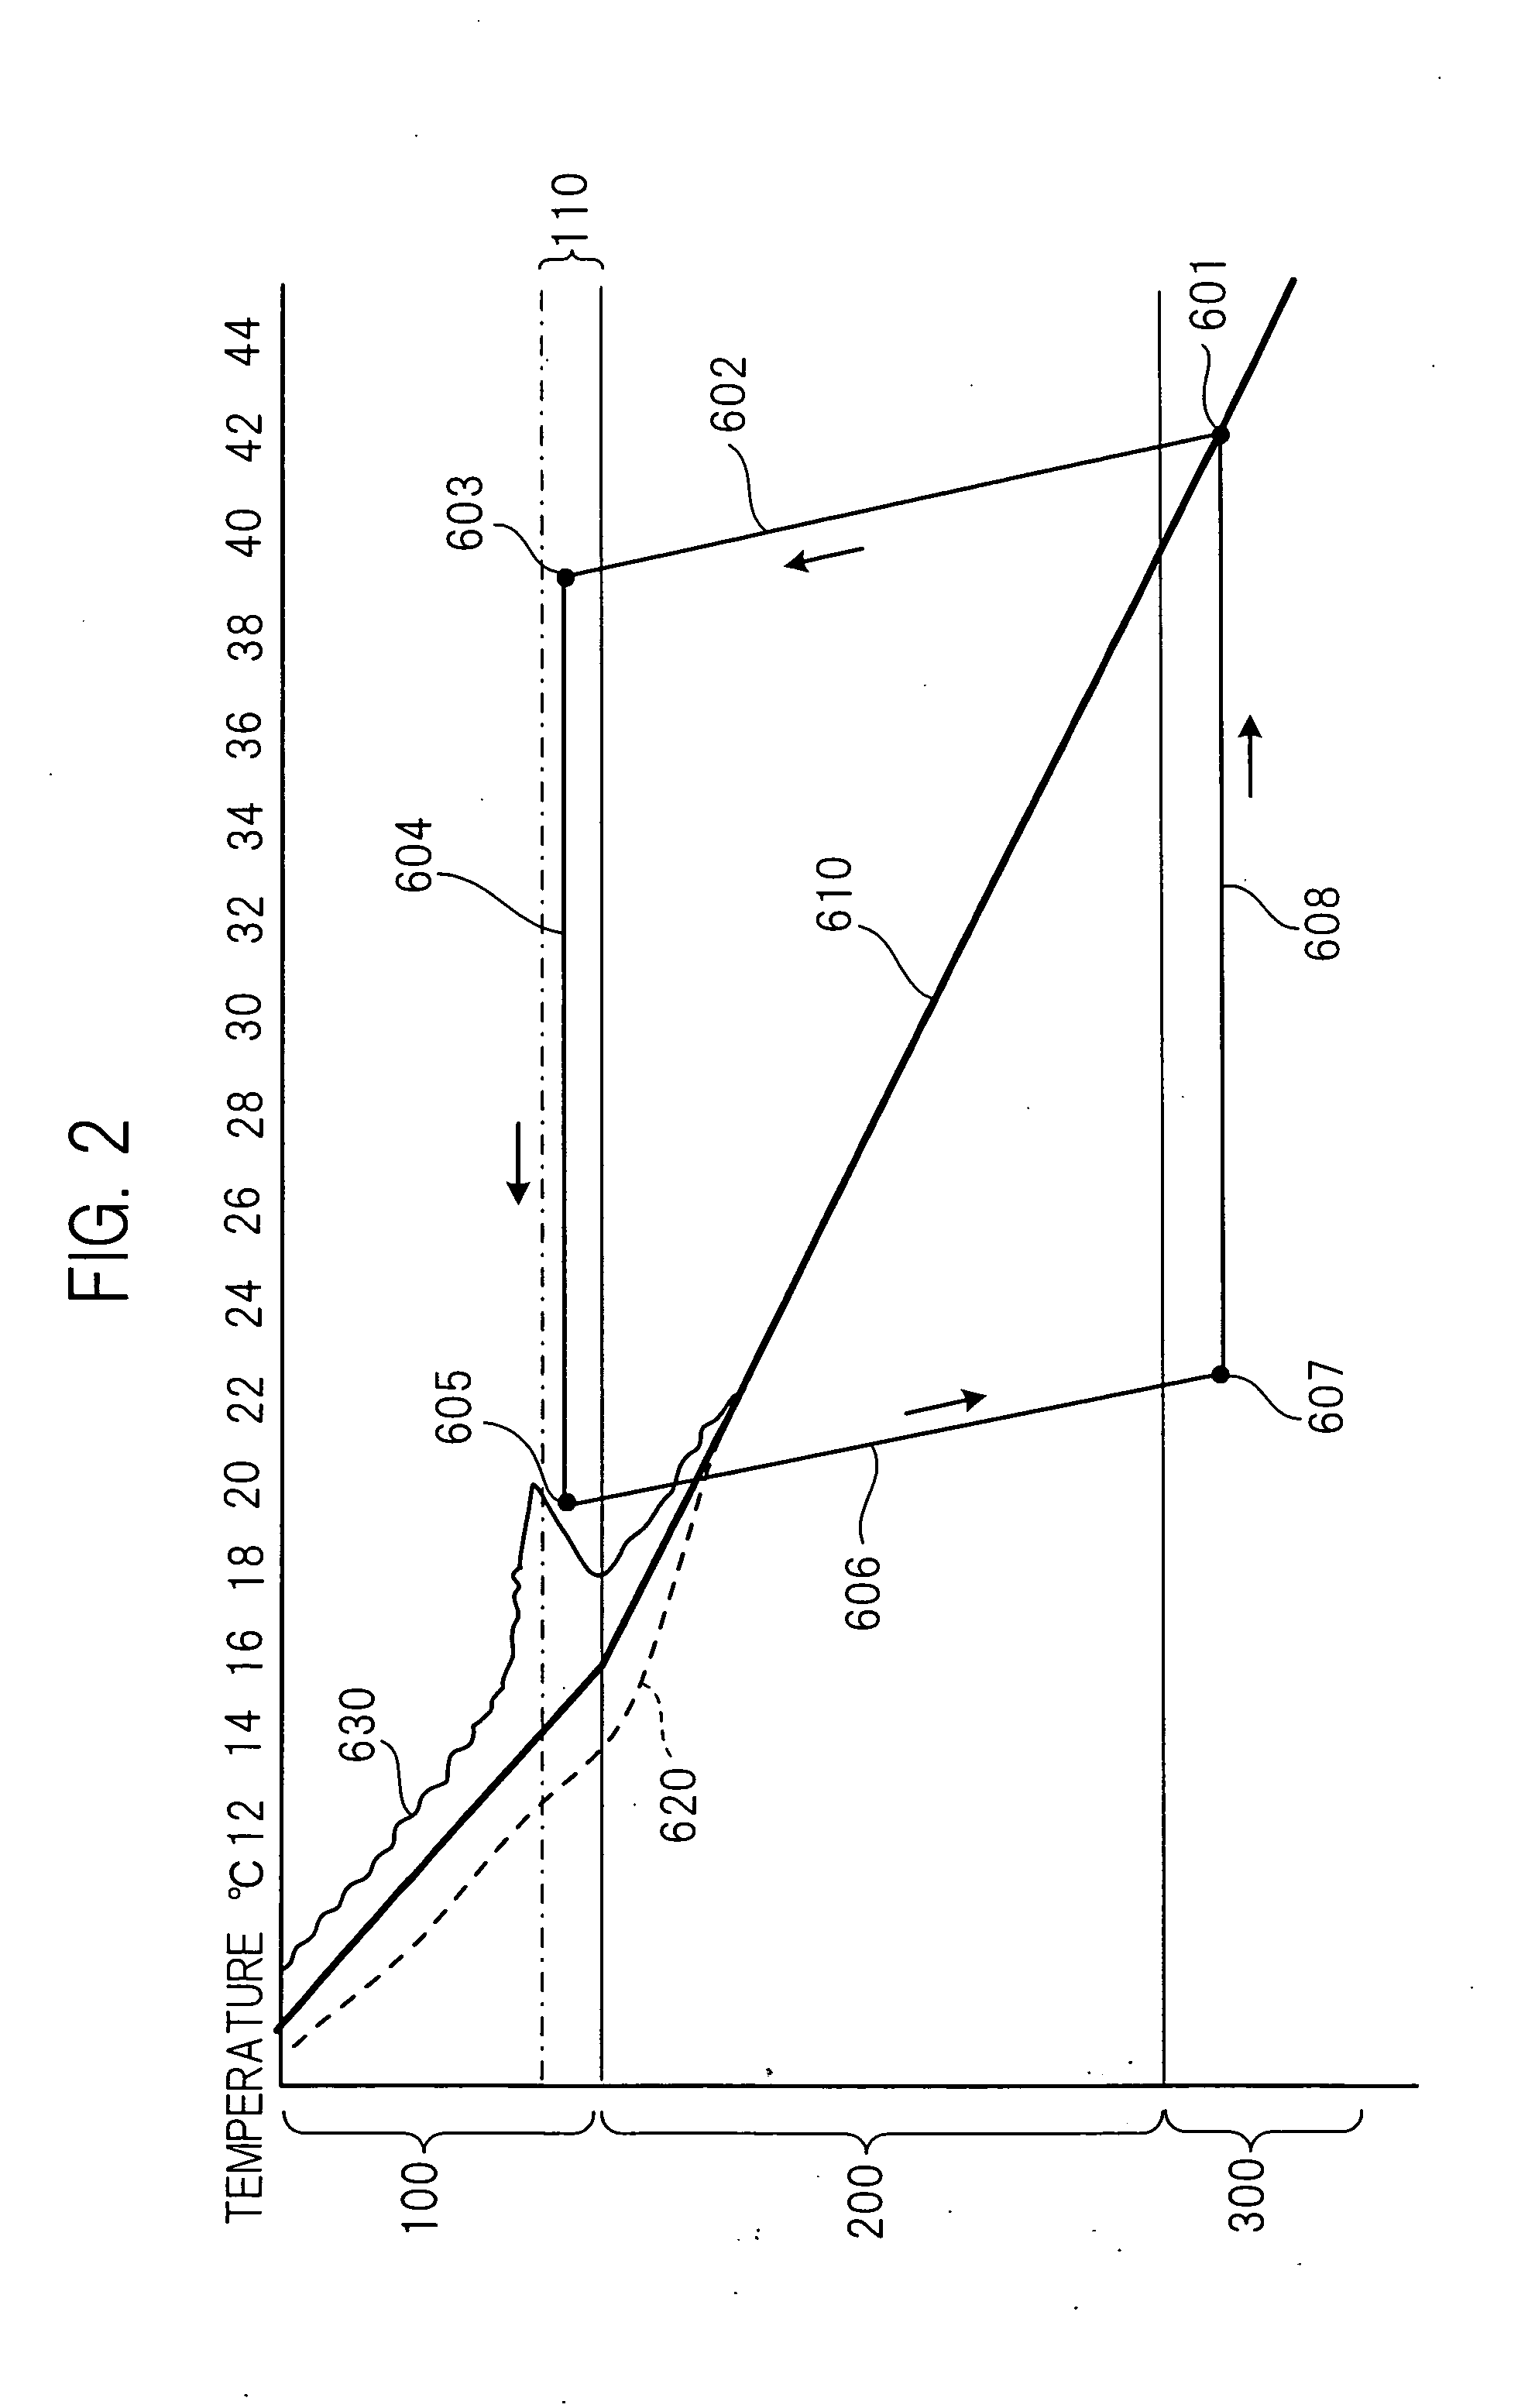 Methane hydrate dissociation accelerating and methane gas deriving system